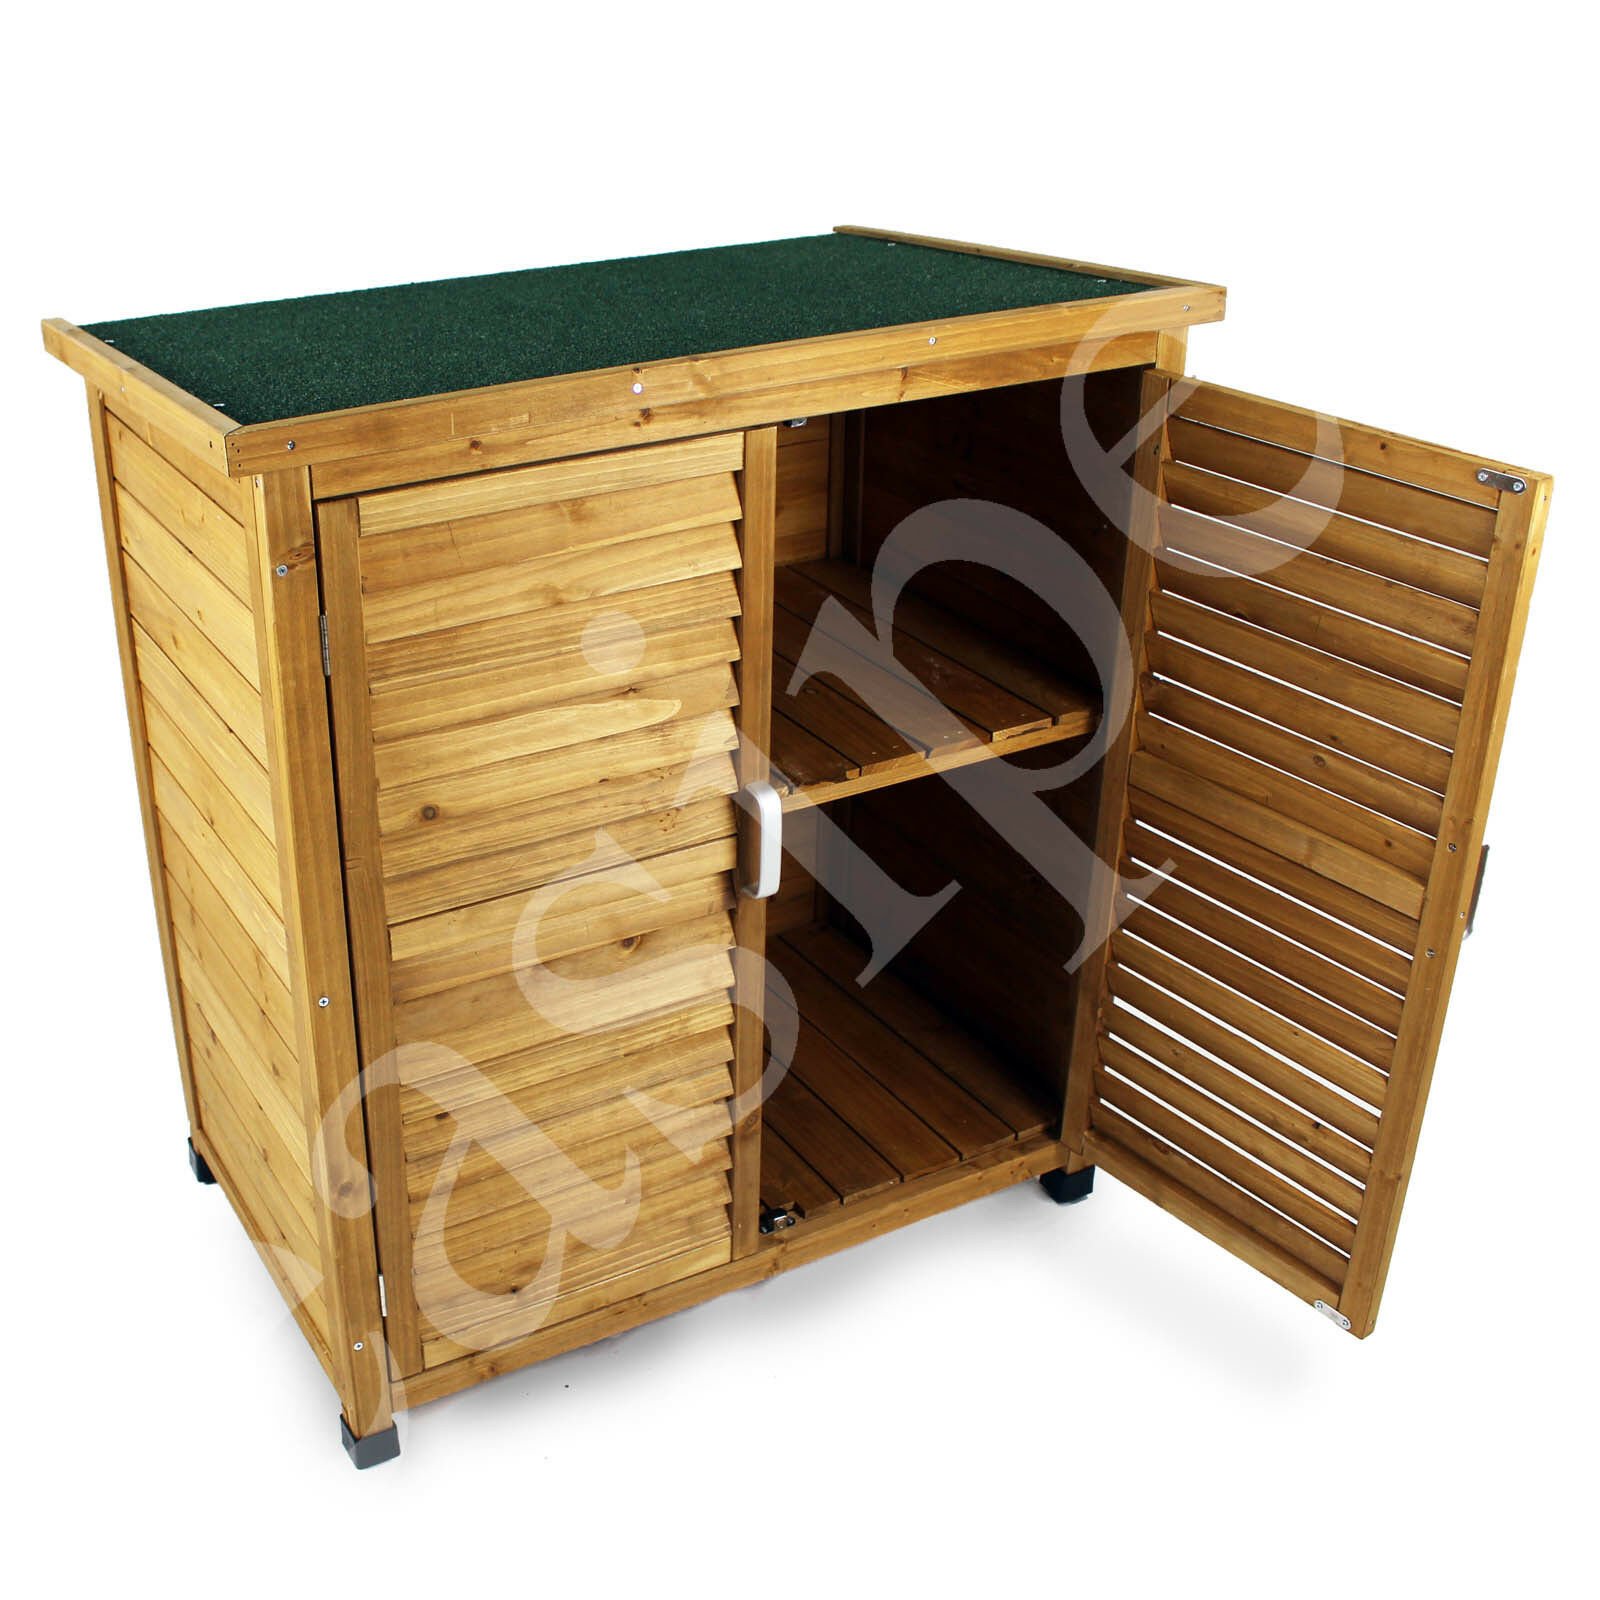 Easipet Wooden Garden Shed for Tool Storage 824